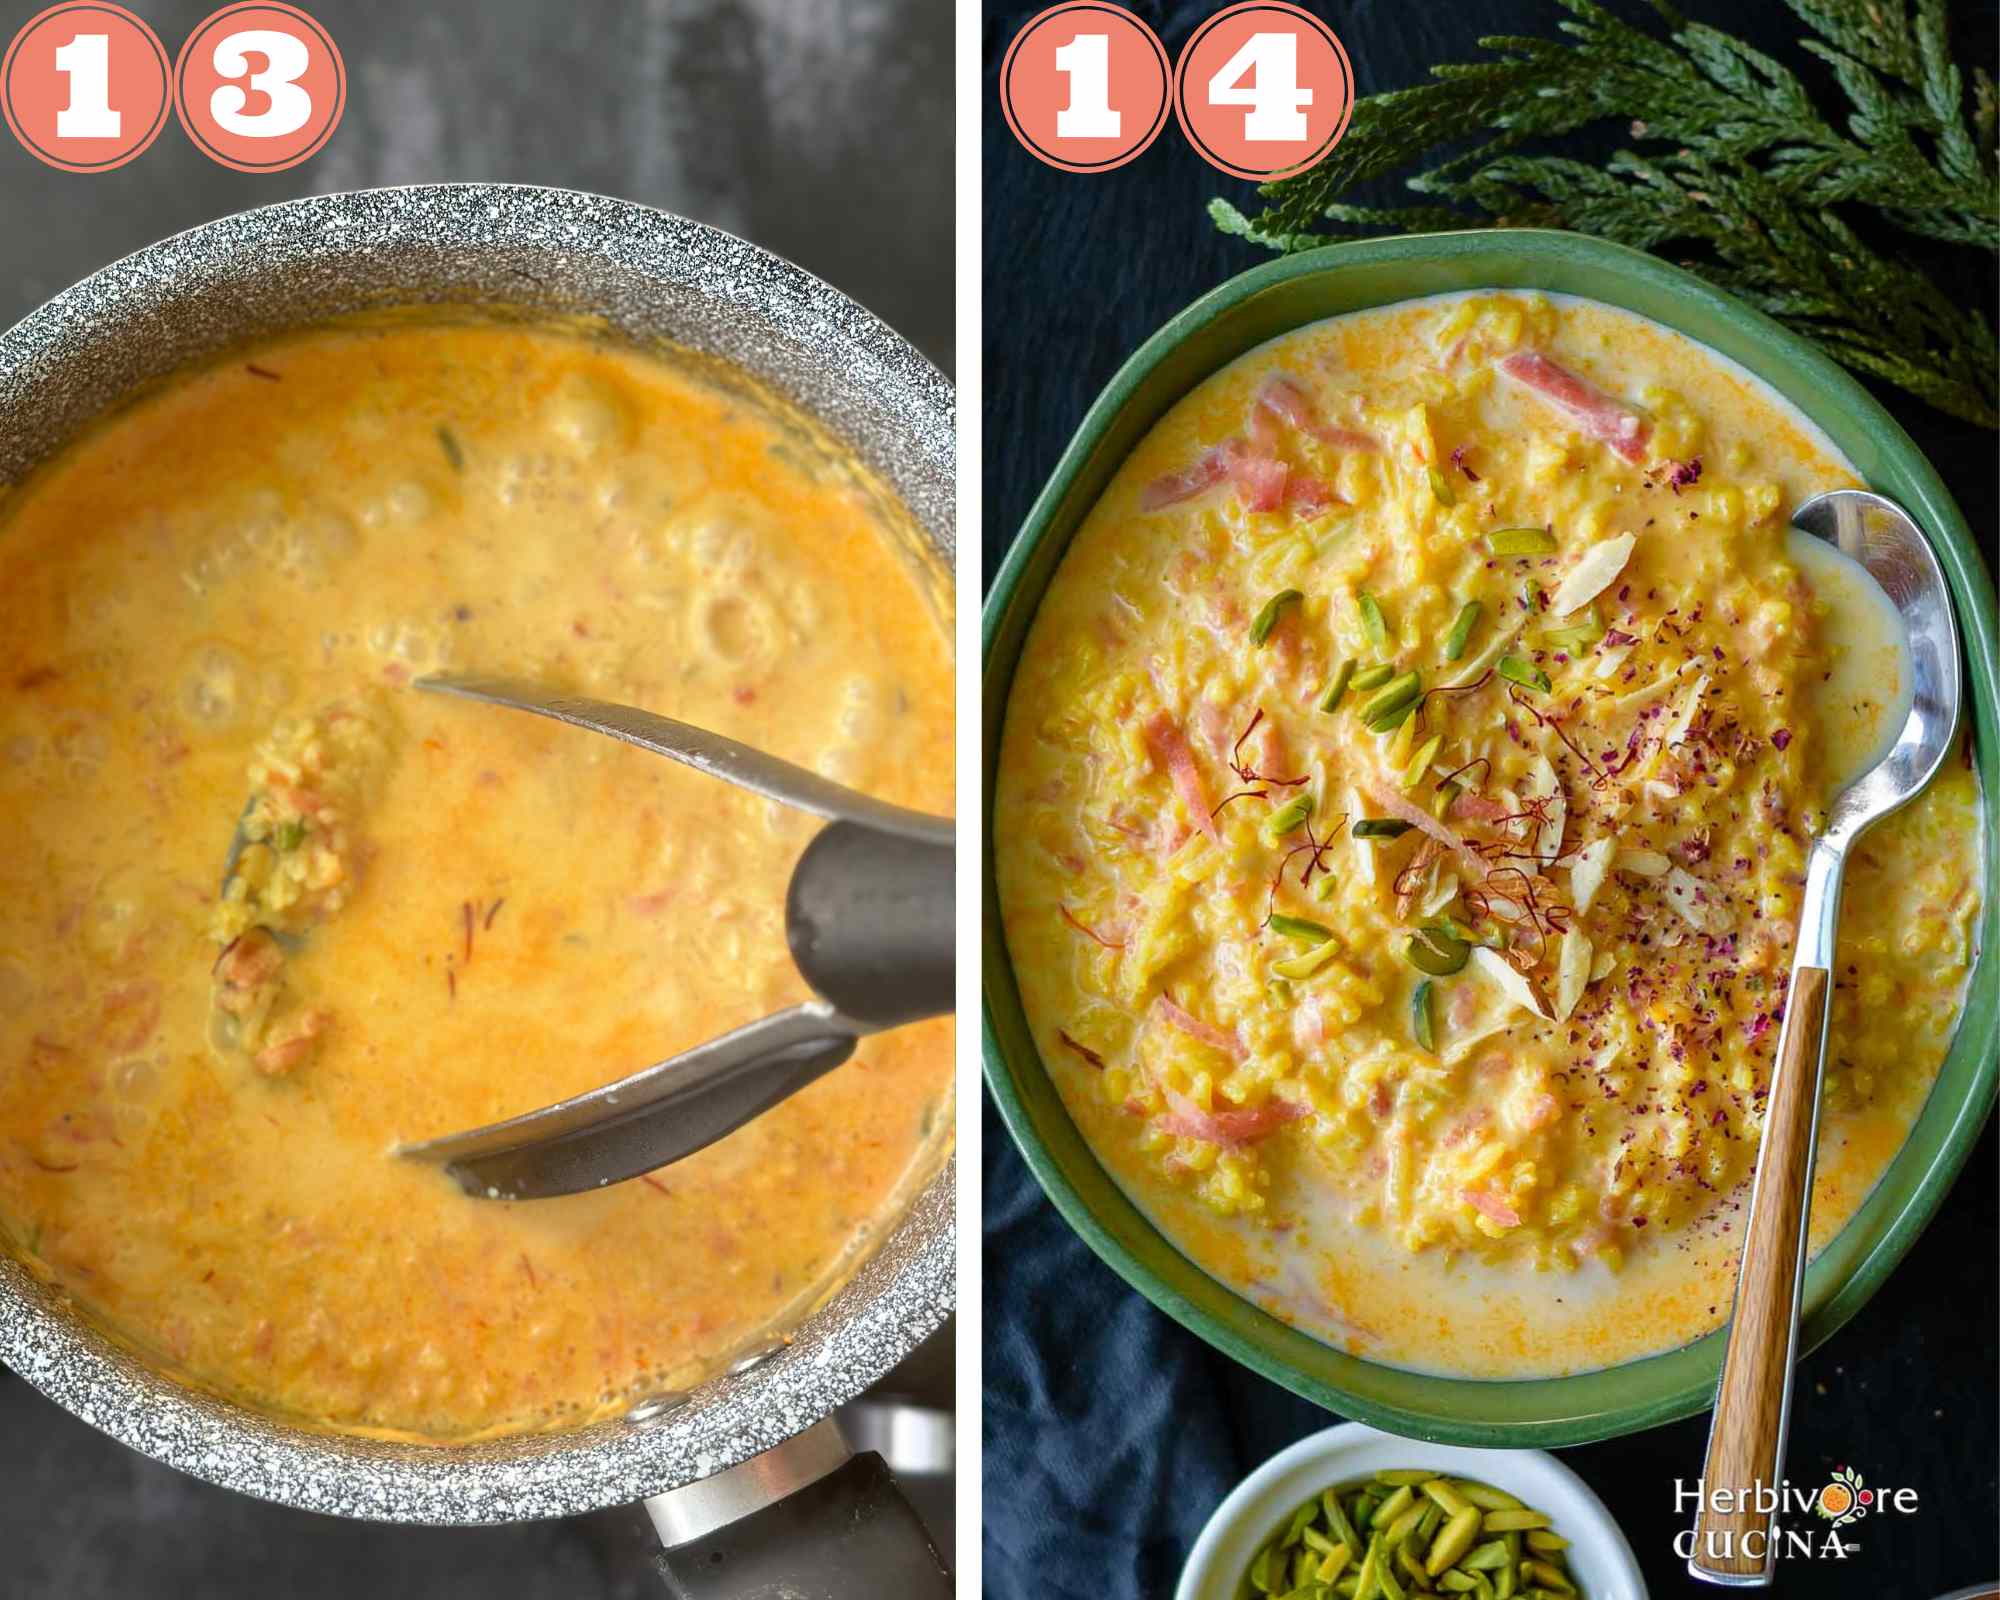 Collage steps to make carrot kheer; mash and mix everything before serving warm or cold.